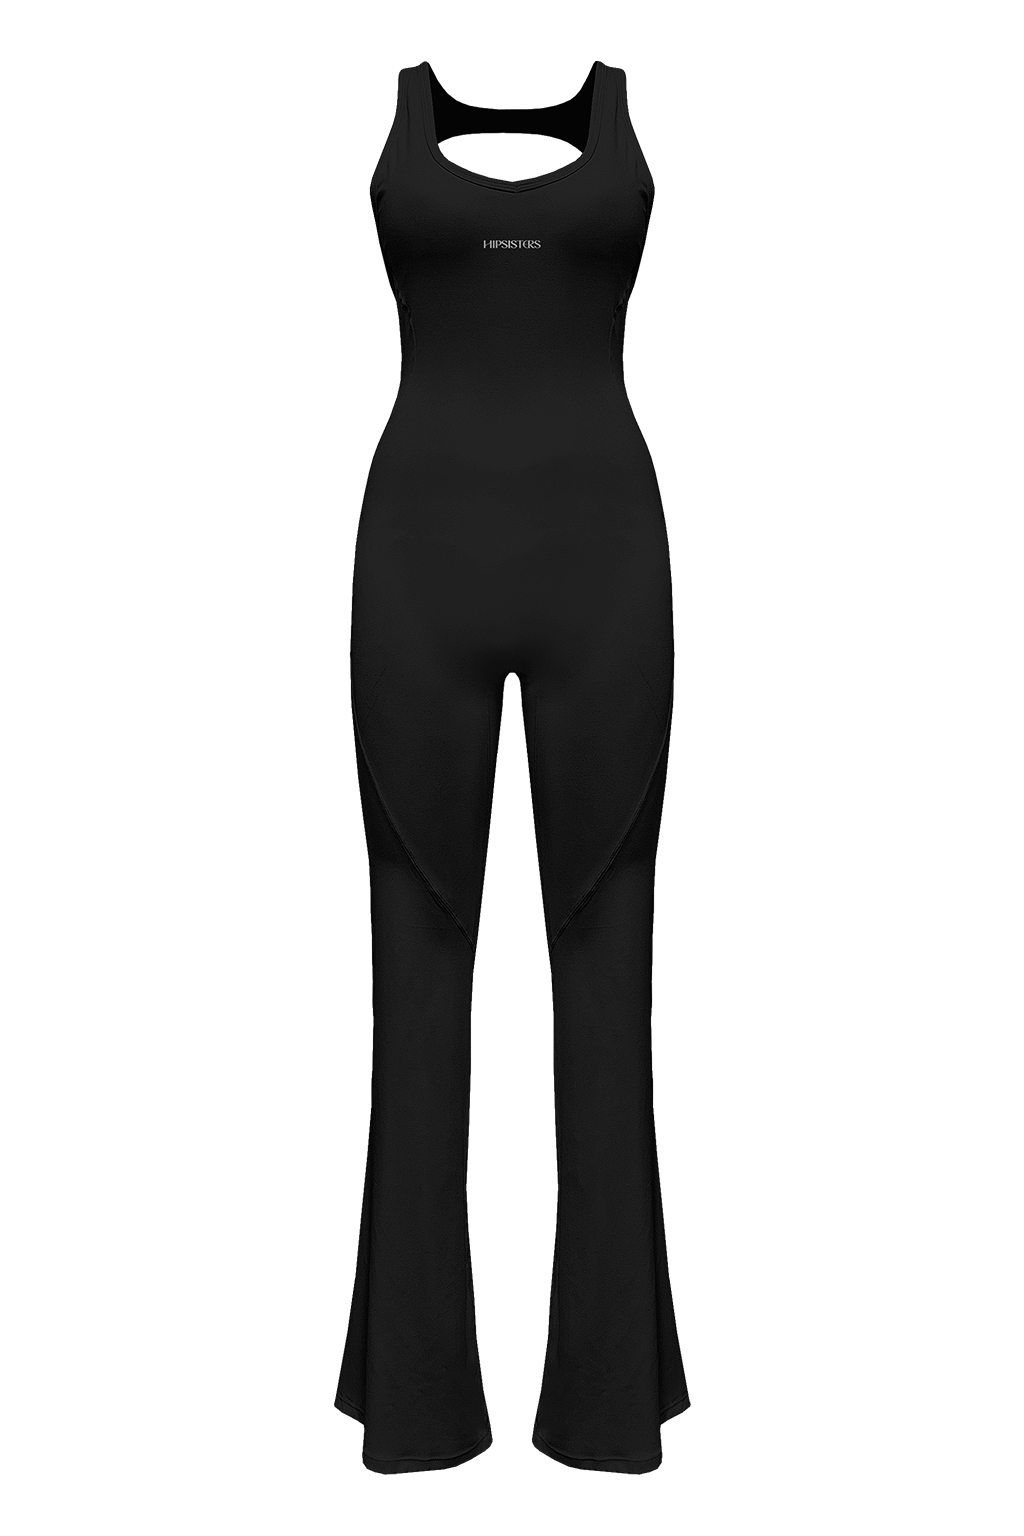 All-in-one Backless Jump Suit Bootcut Black